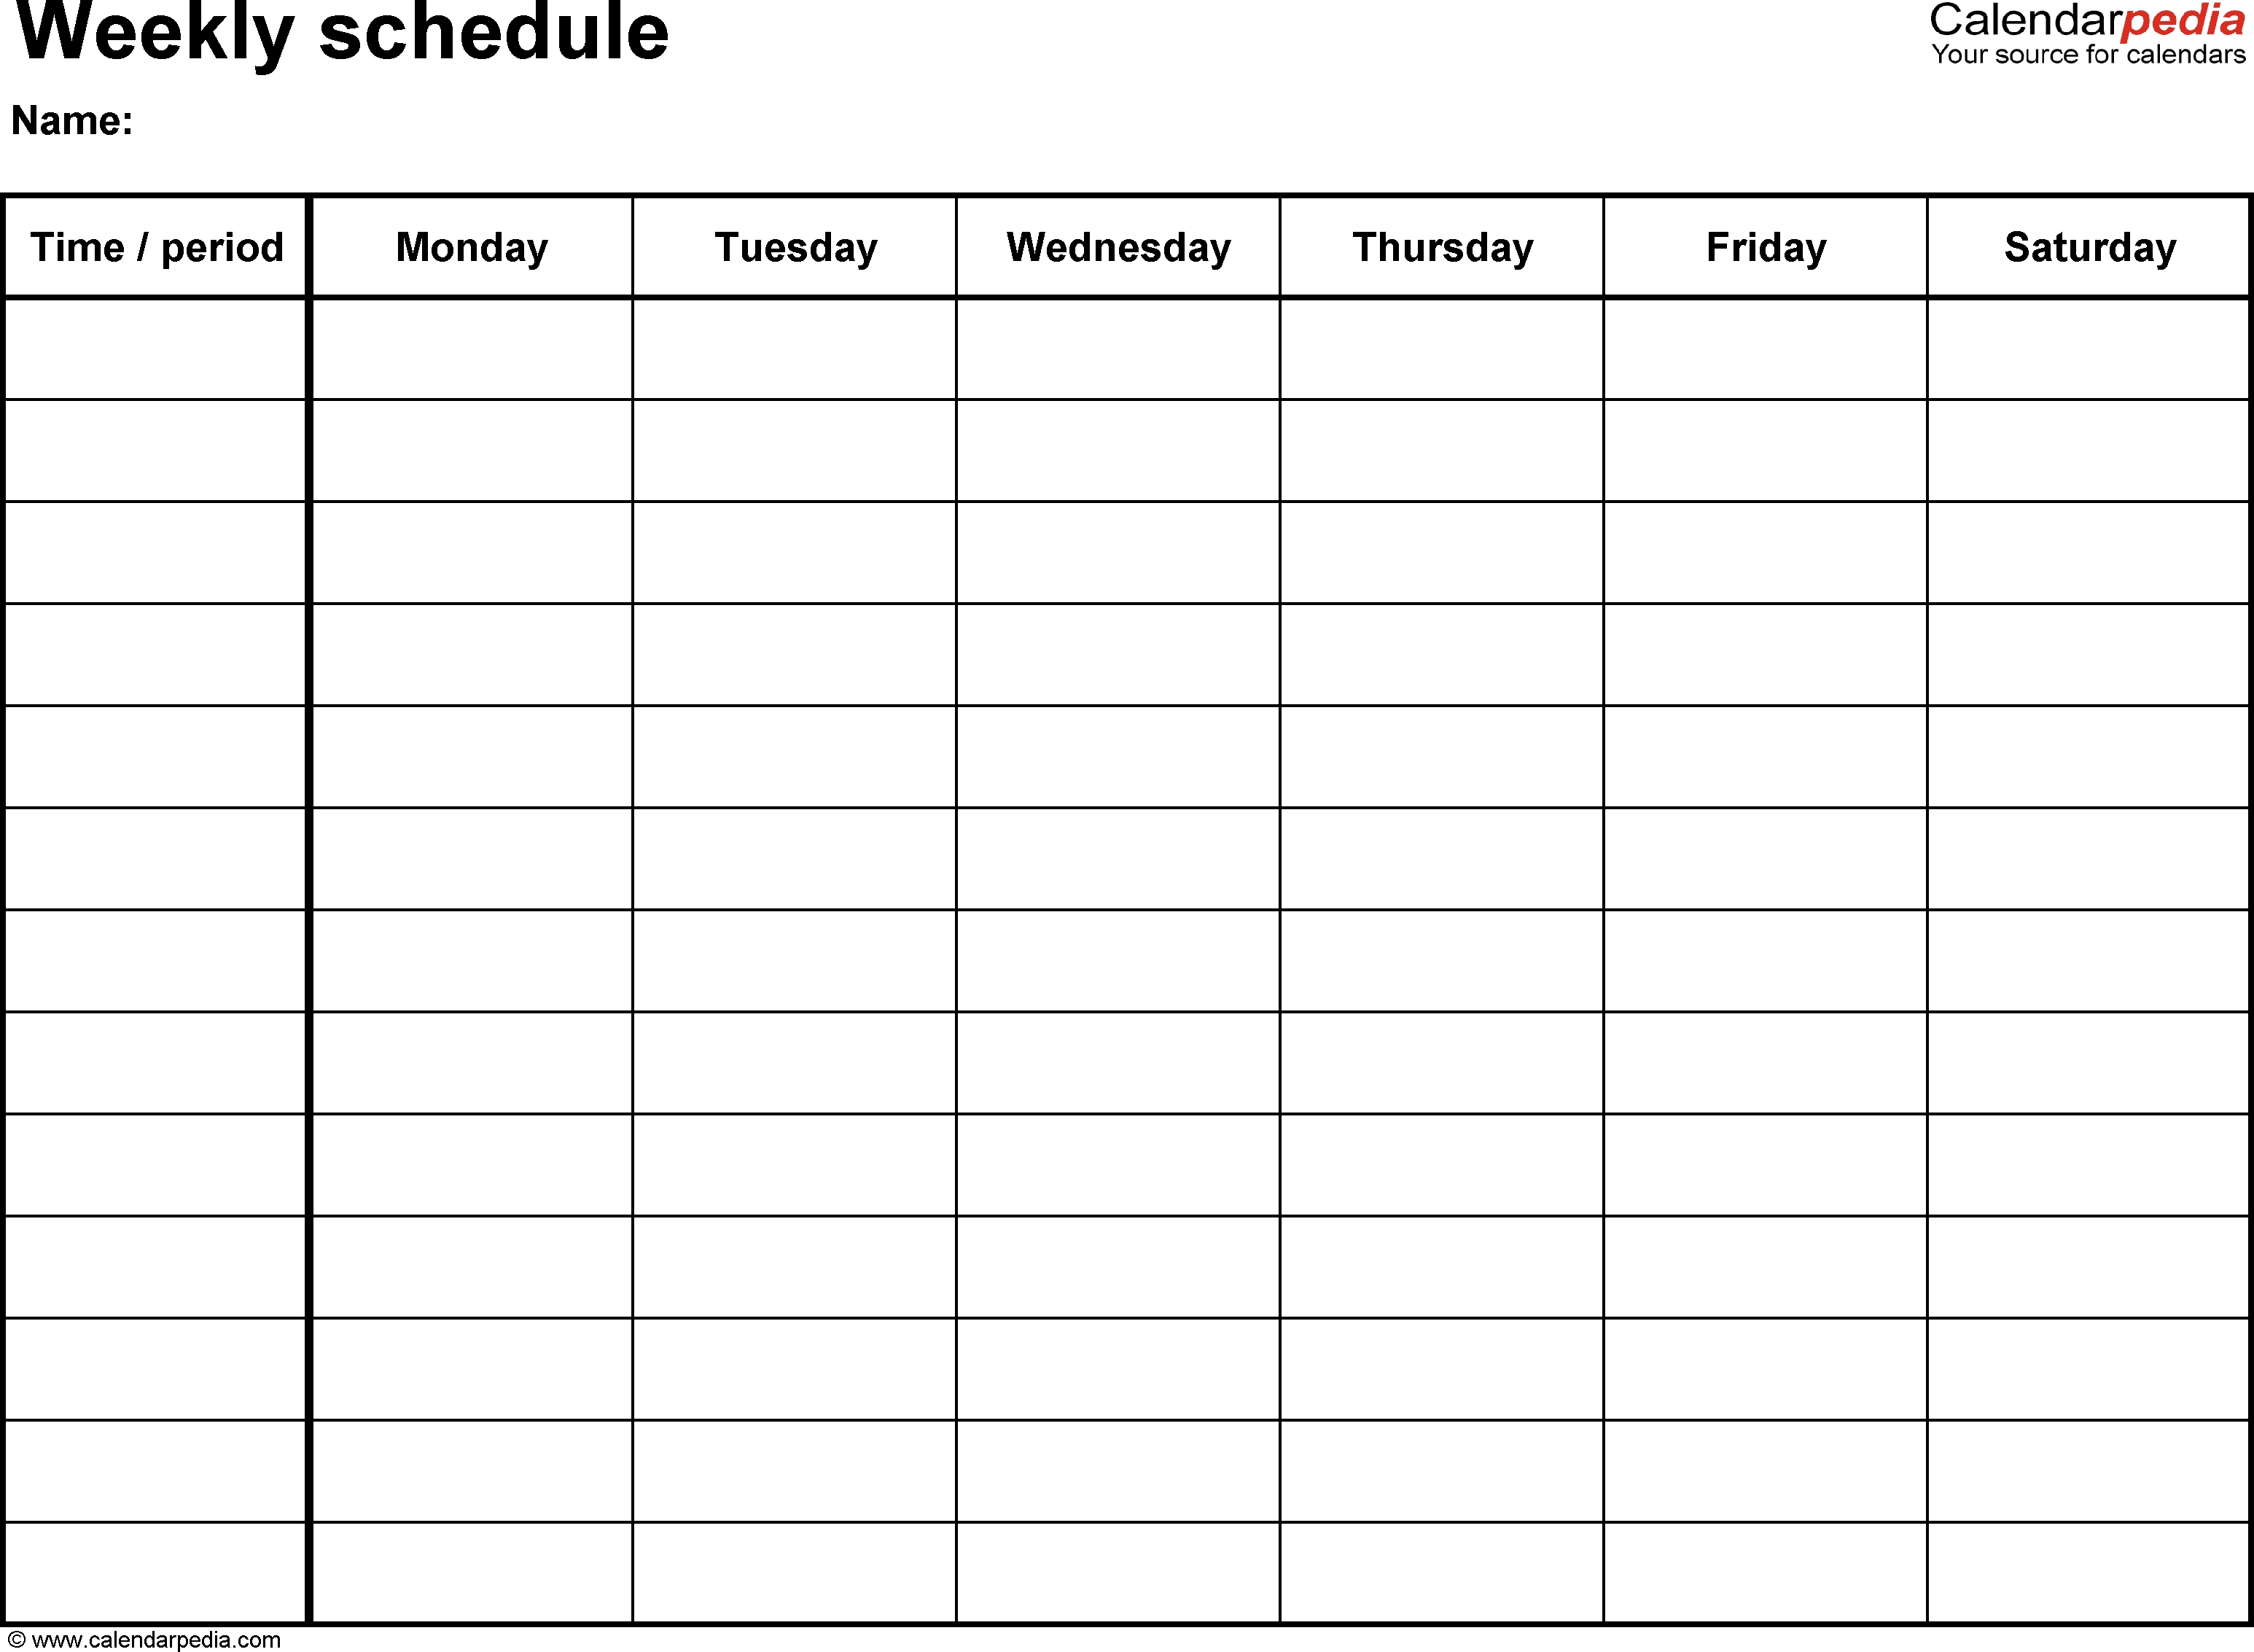 Free Weekly Schedule Templates For Word - 18 Templates-Monday-Friday Blank Weekly Schedule